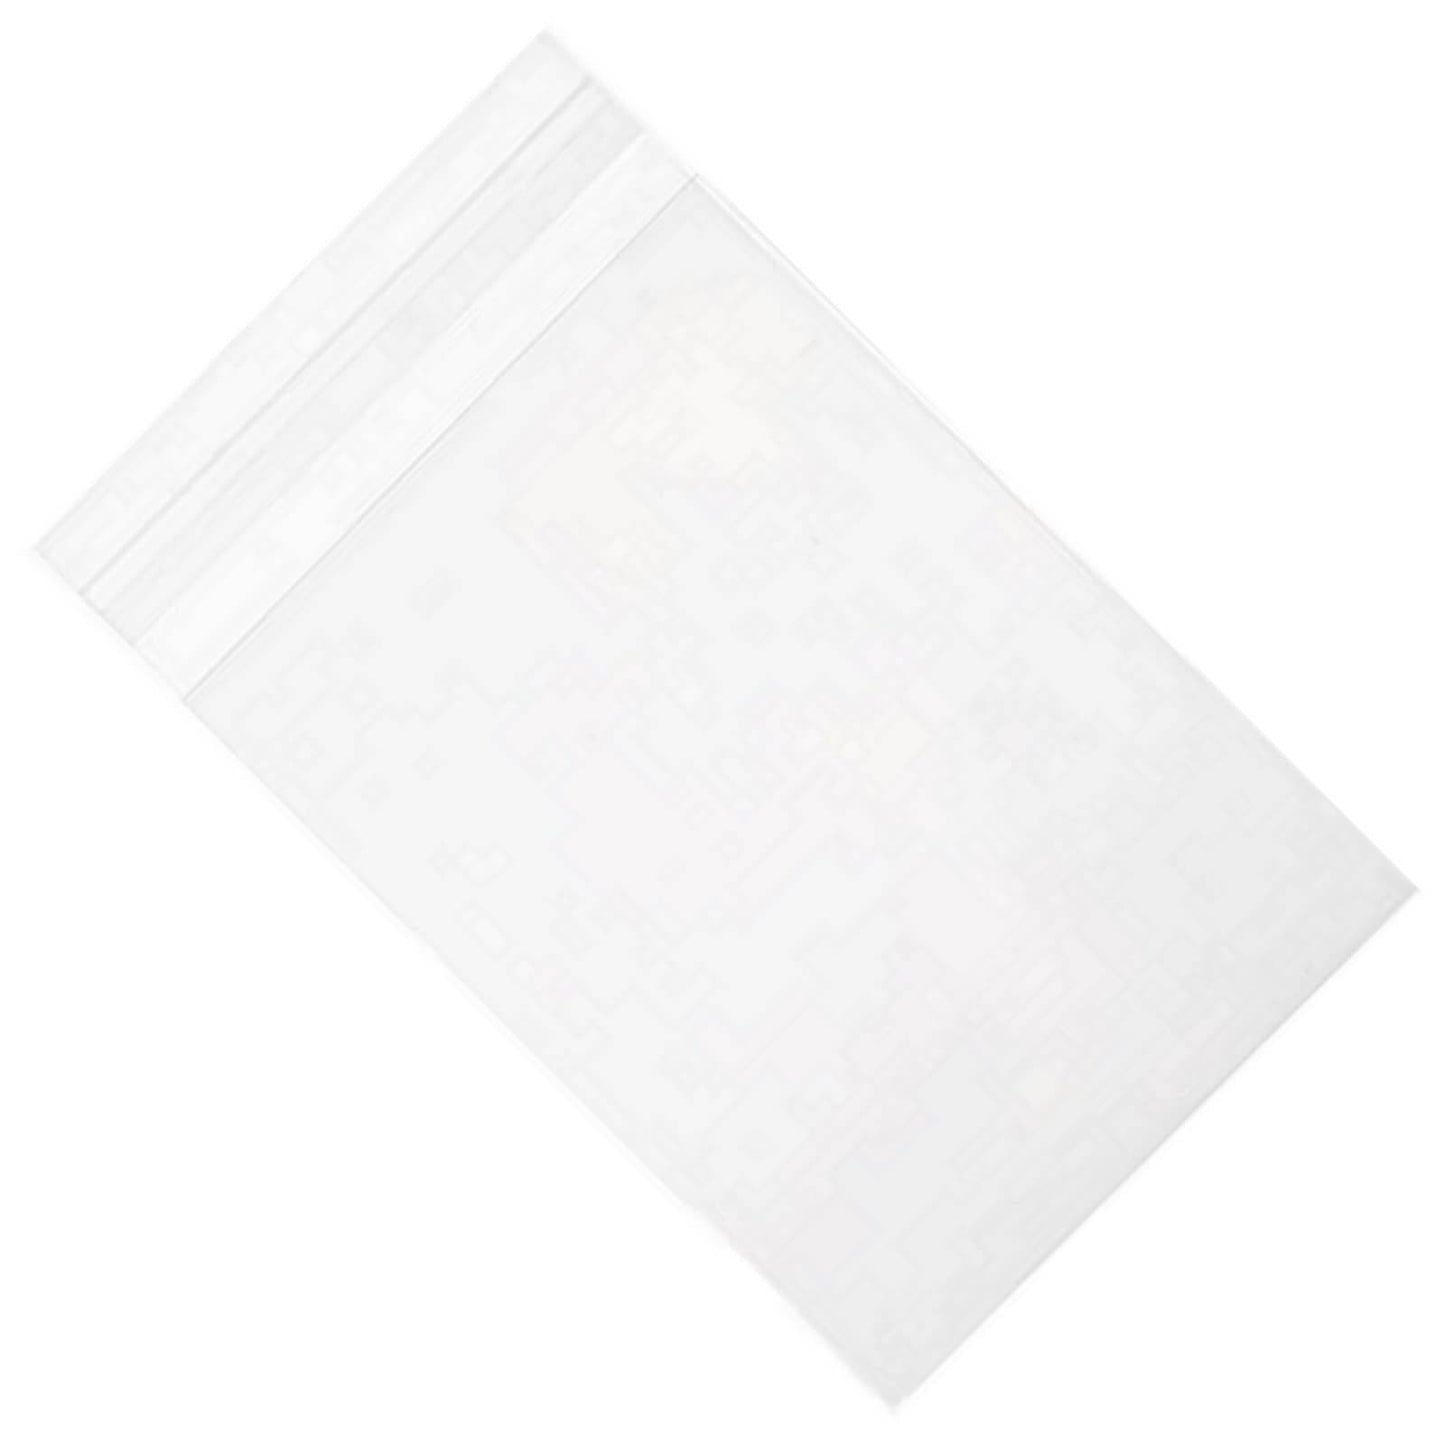 Clearbags Crystal Clear Bags w/ Flap 5 1/4" x 7 1/8" 100-Pk B75S, Photo/Cards..